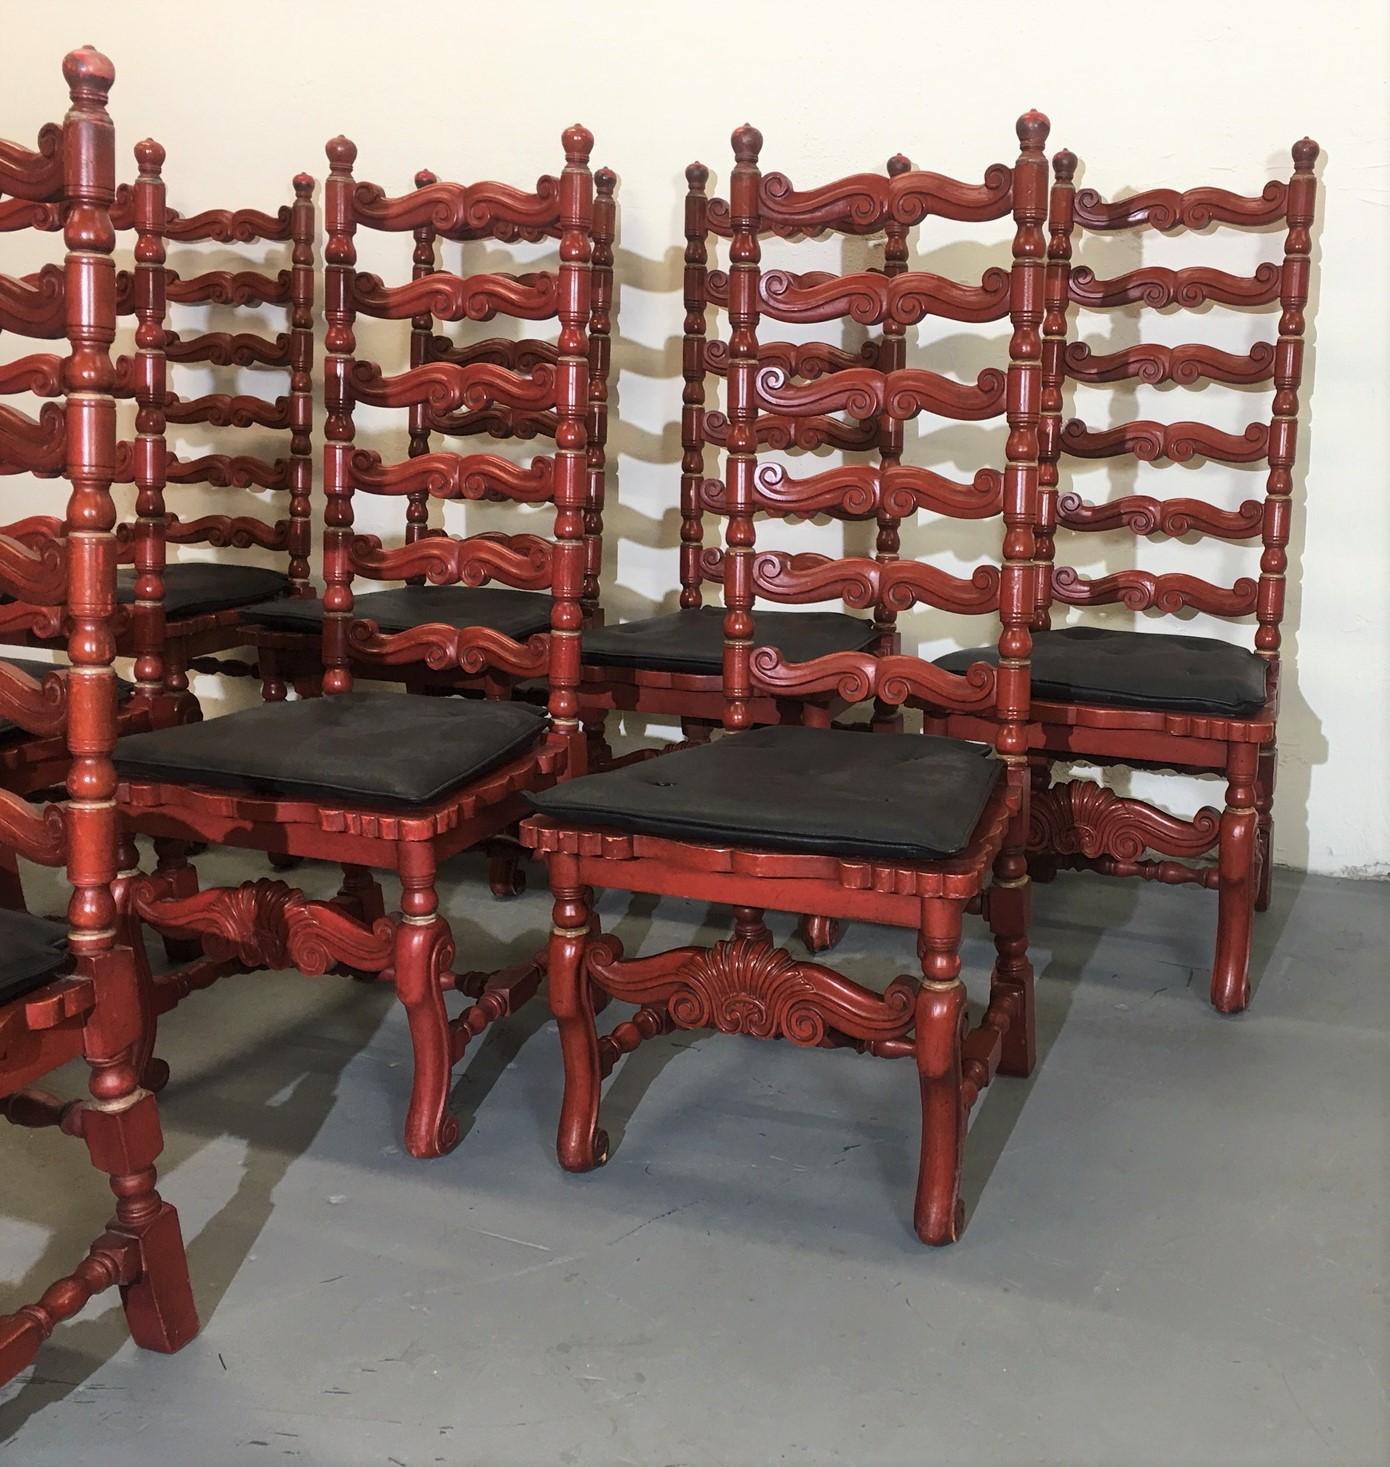 Set of eight ladder back chairs. The frames are wood-finished in red color. The seats are newly covered in black leather.